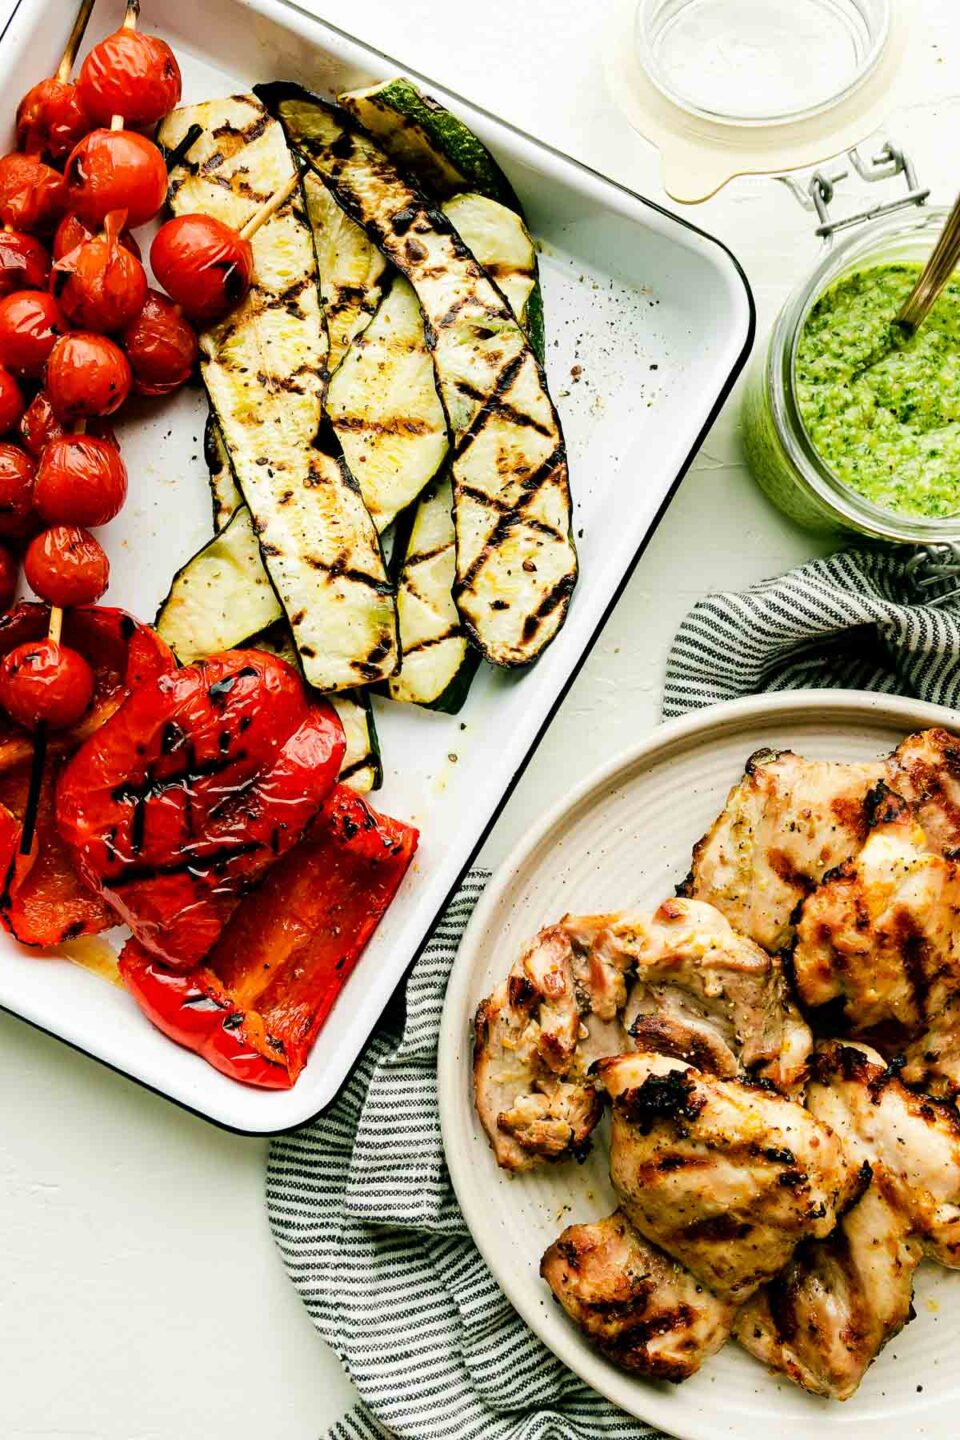 An overhead shot of a baking dish with grilled tomato skewers, red peppers, and zucchini, and a plate of grilled chicken atop a striped towel on a white surface. A jar of pesto sits beside them.